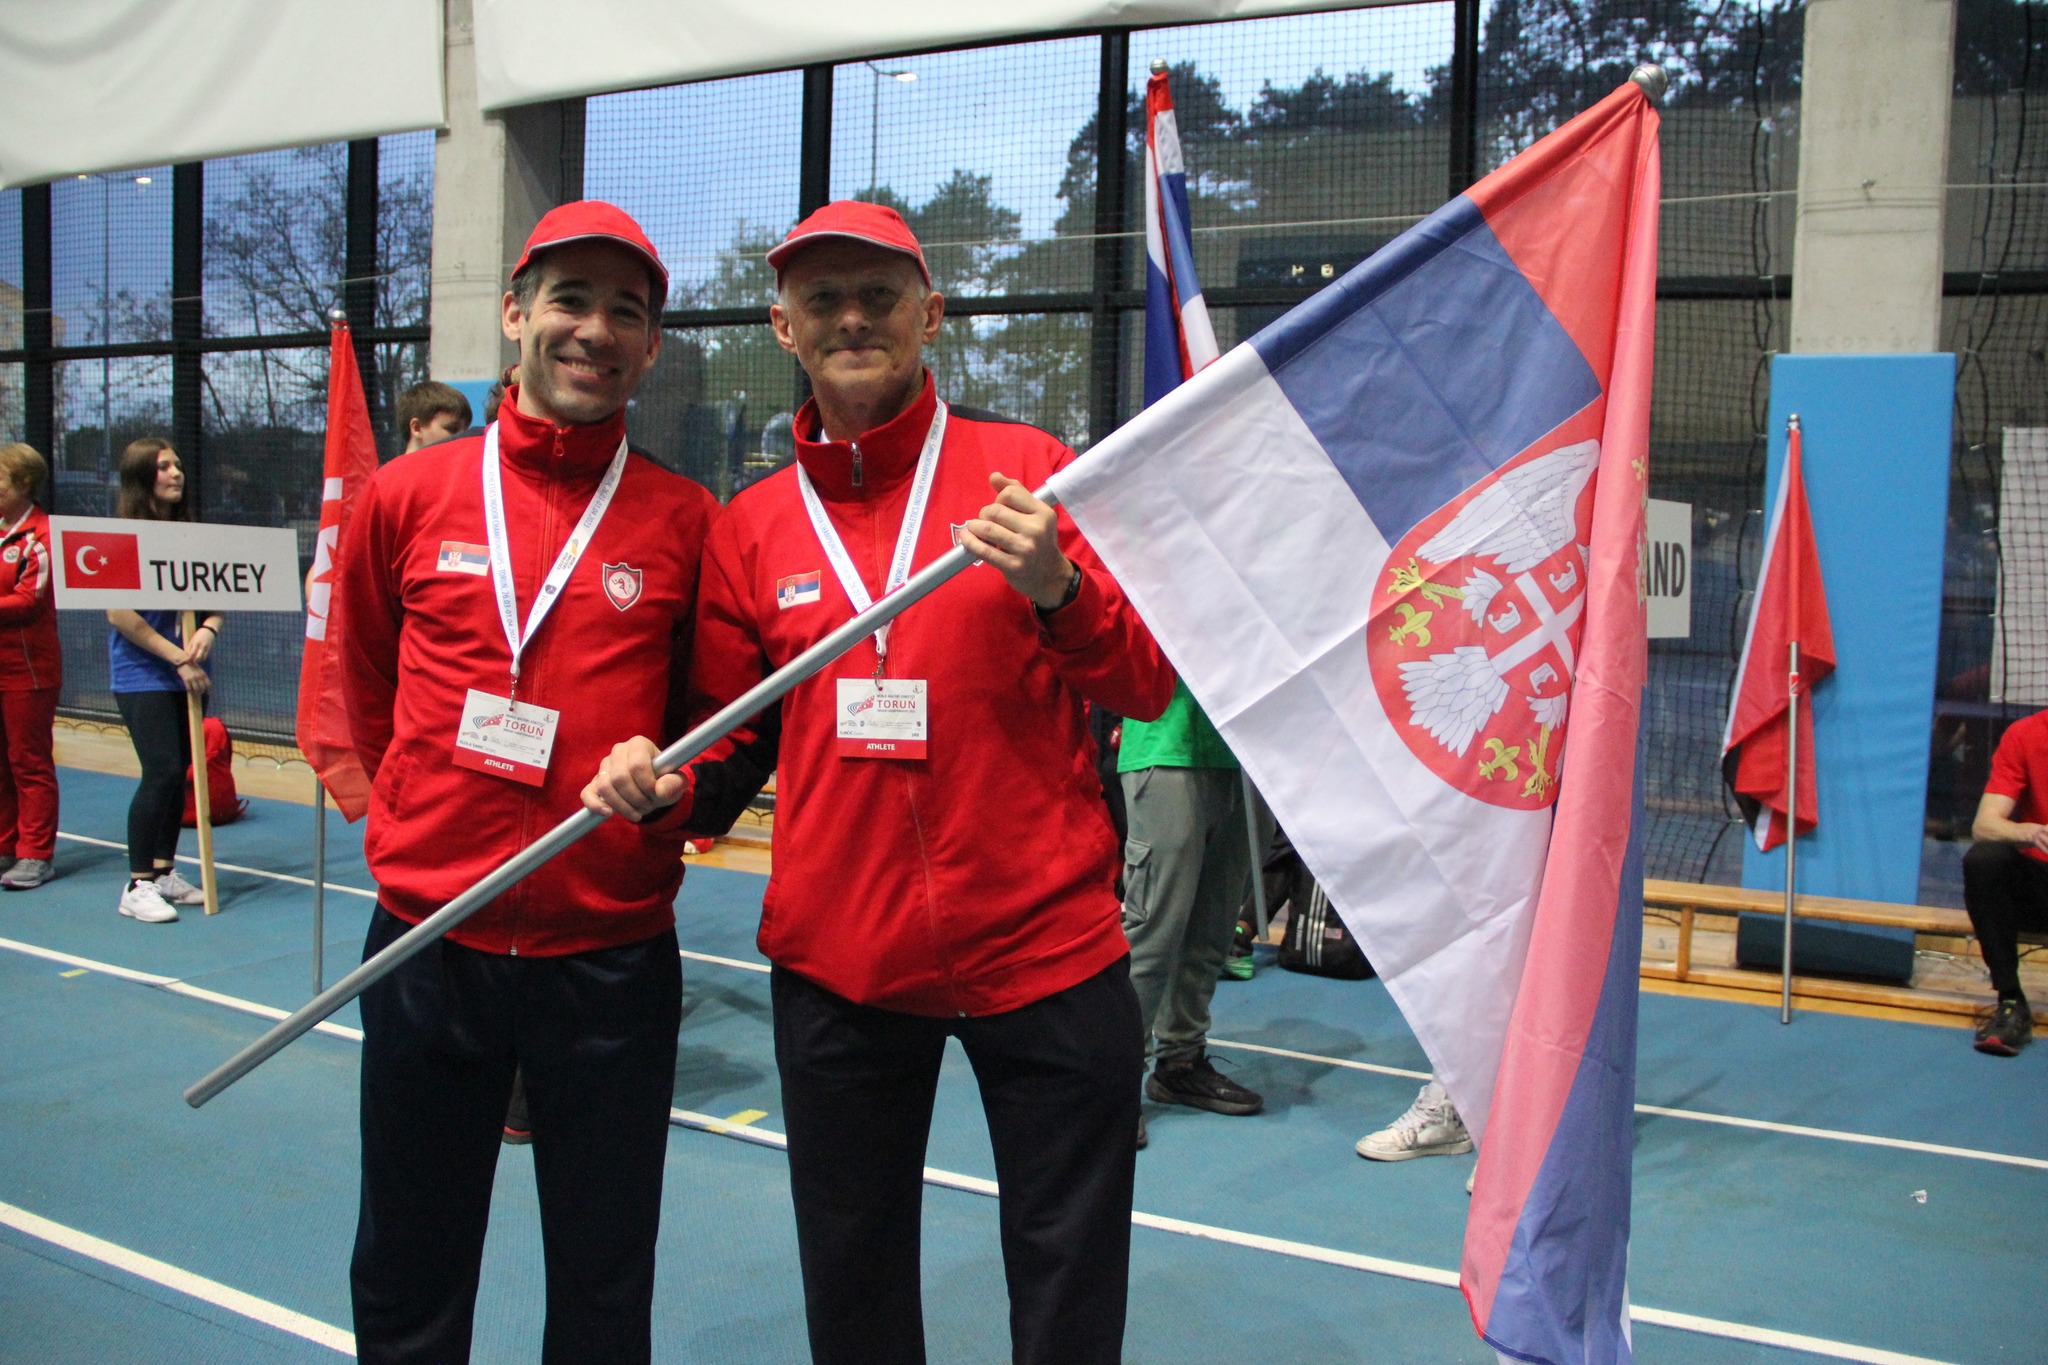 Team Serbia ready for Opening Ceremony. Photo by Sandy Triolo.